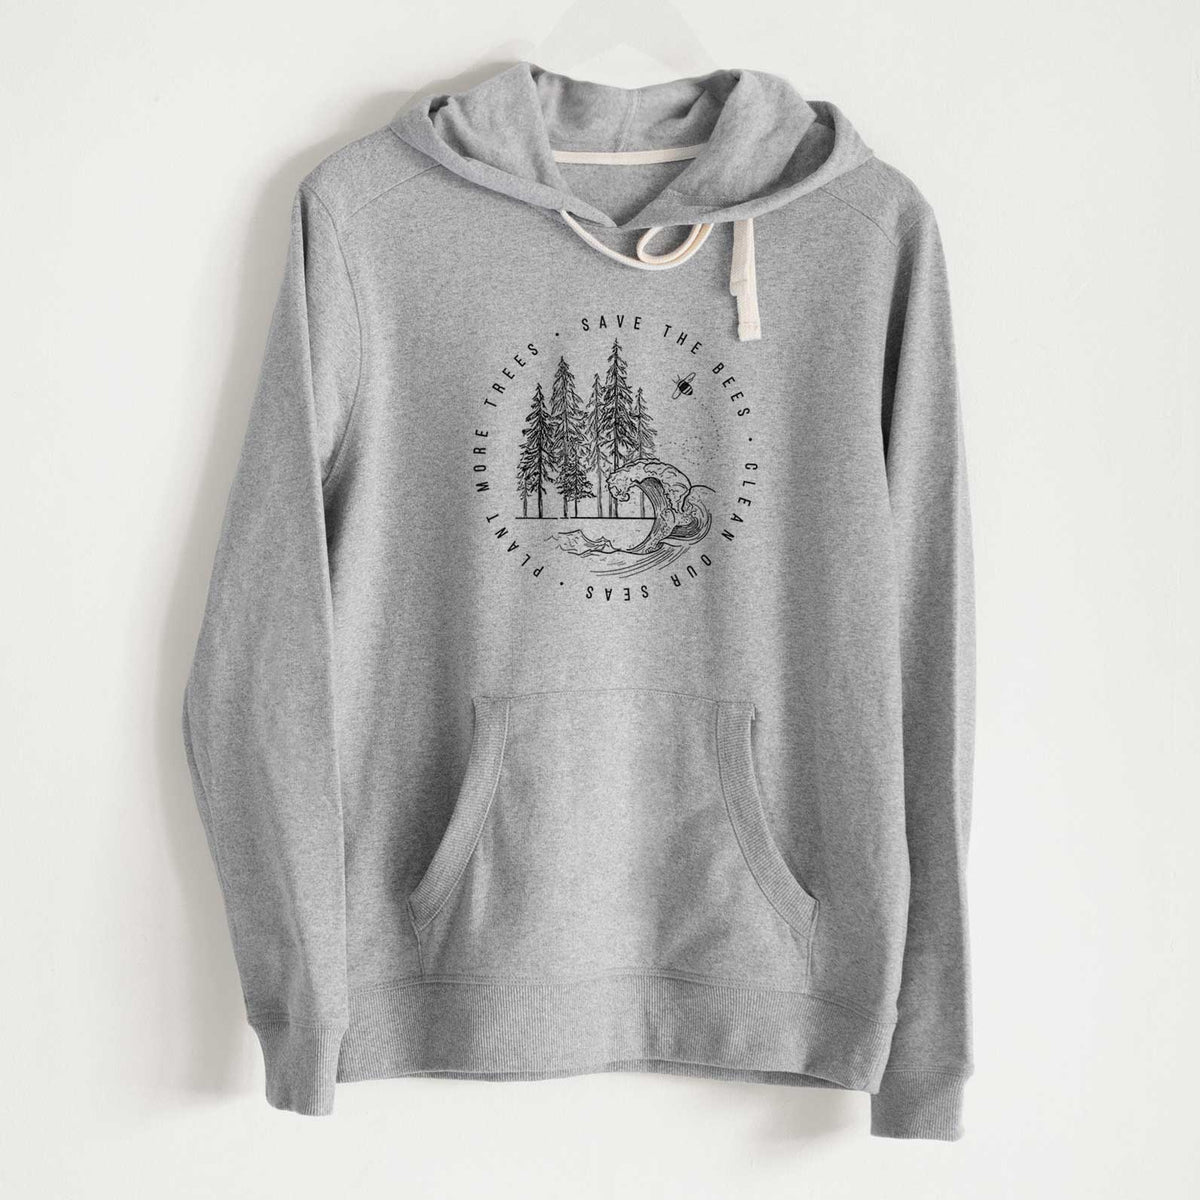 Save the Bees, Clean our Seas, Plant more Trees - Unisex Recycled Hoodie - CLOSEOUT - FINAL SALE